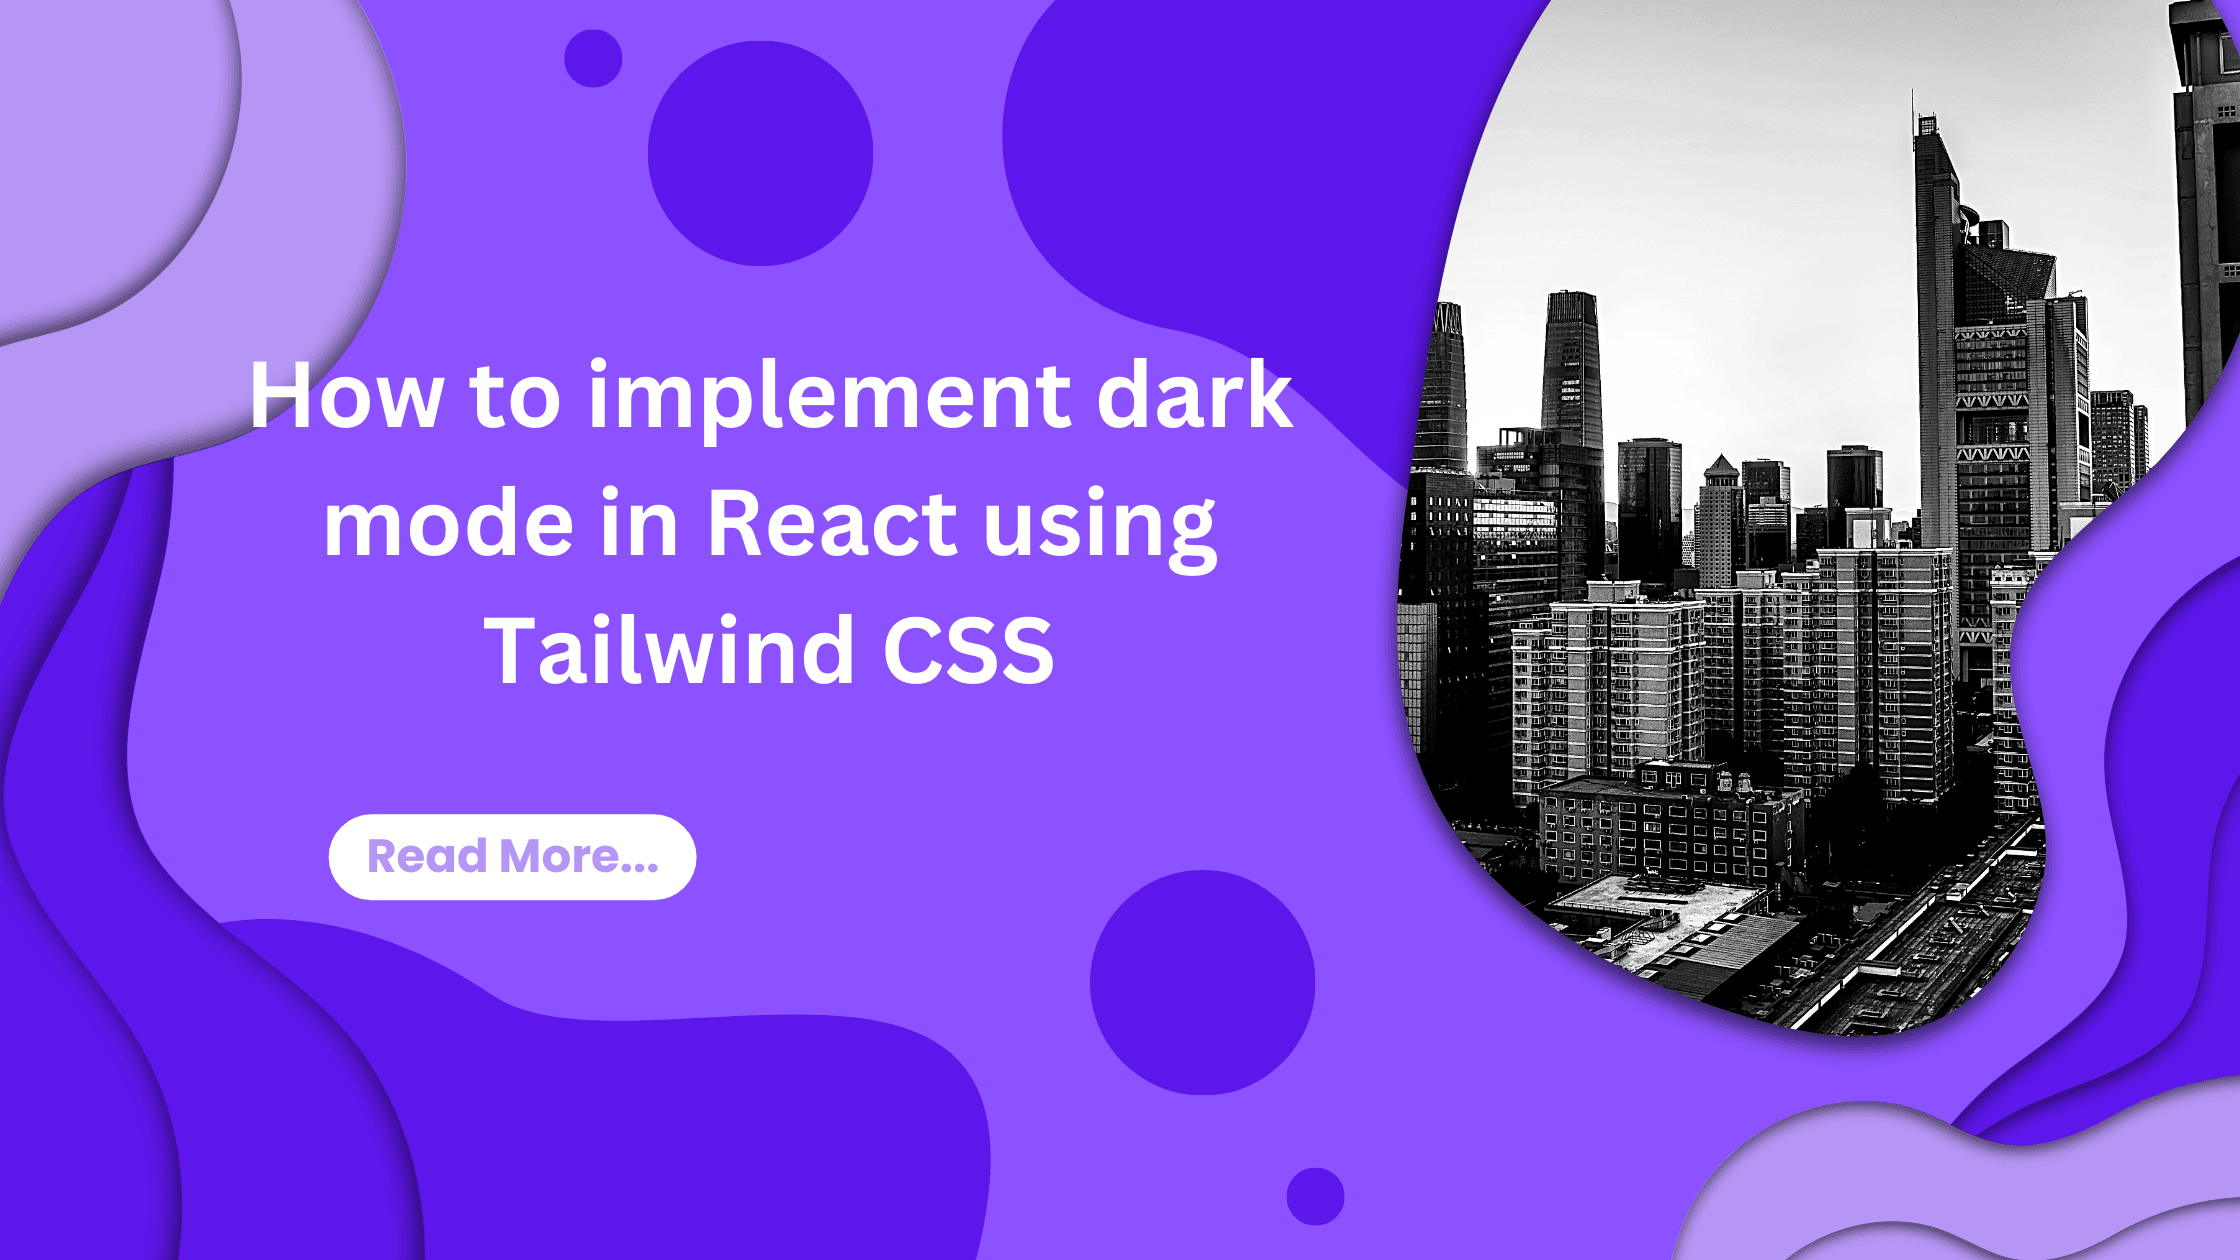 How To Implement Dark Mode In Tailwind Css